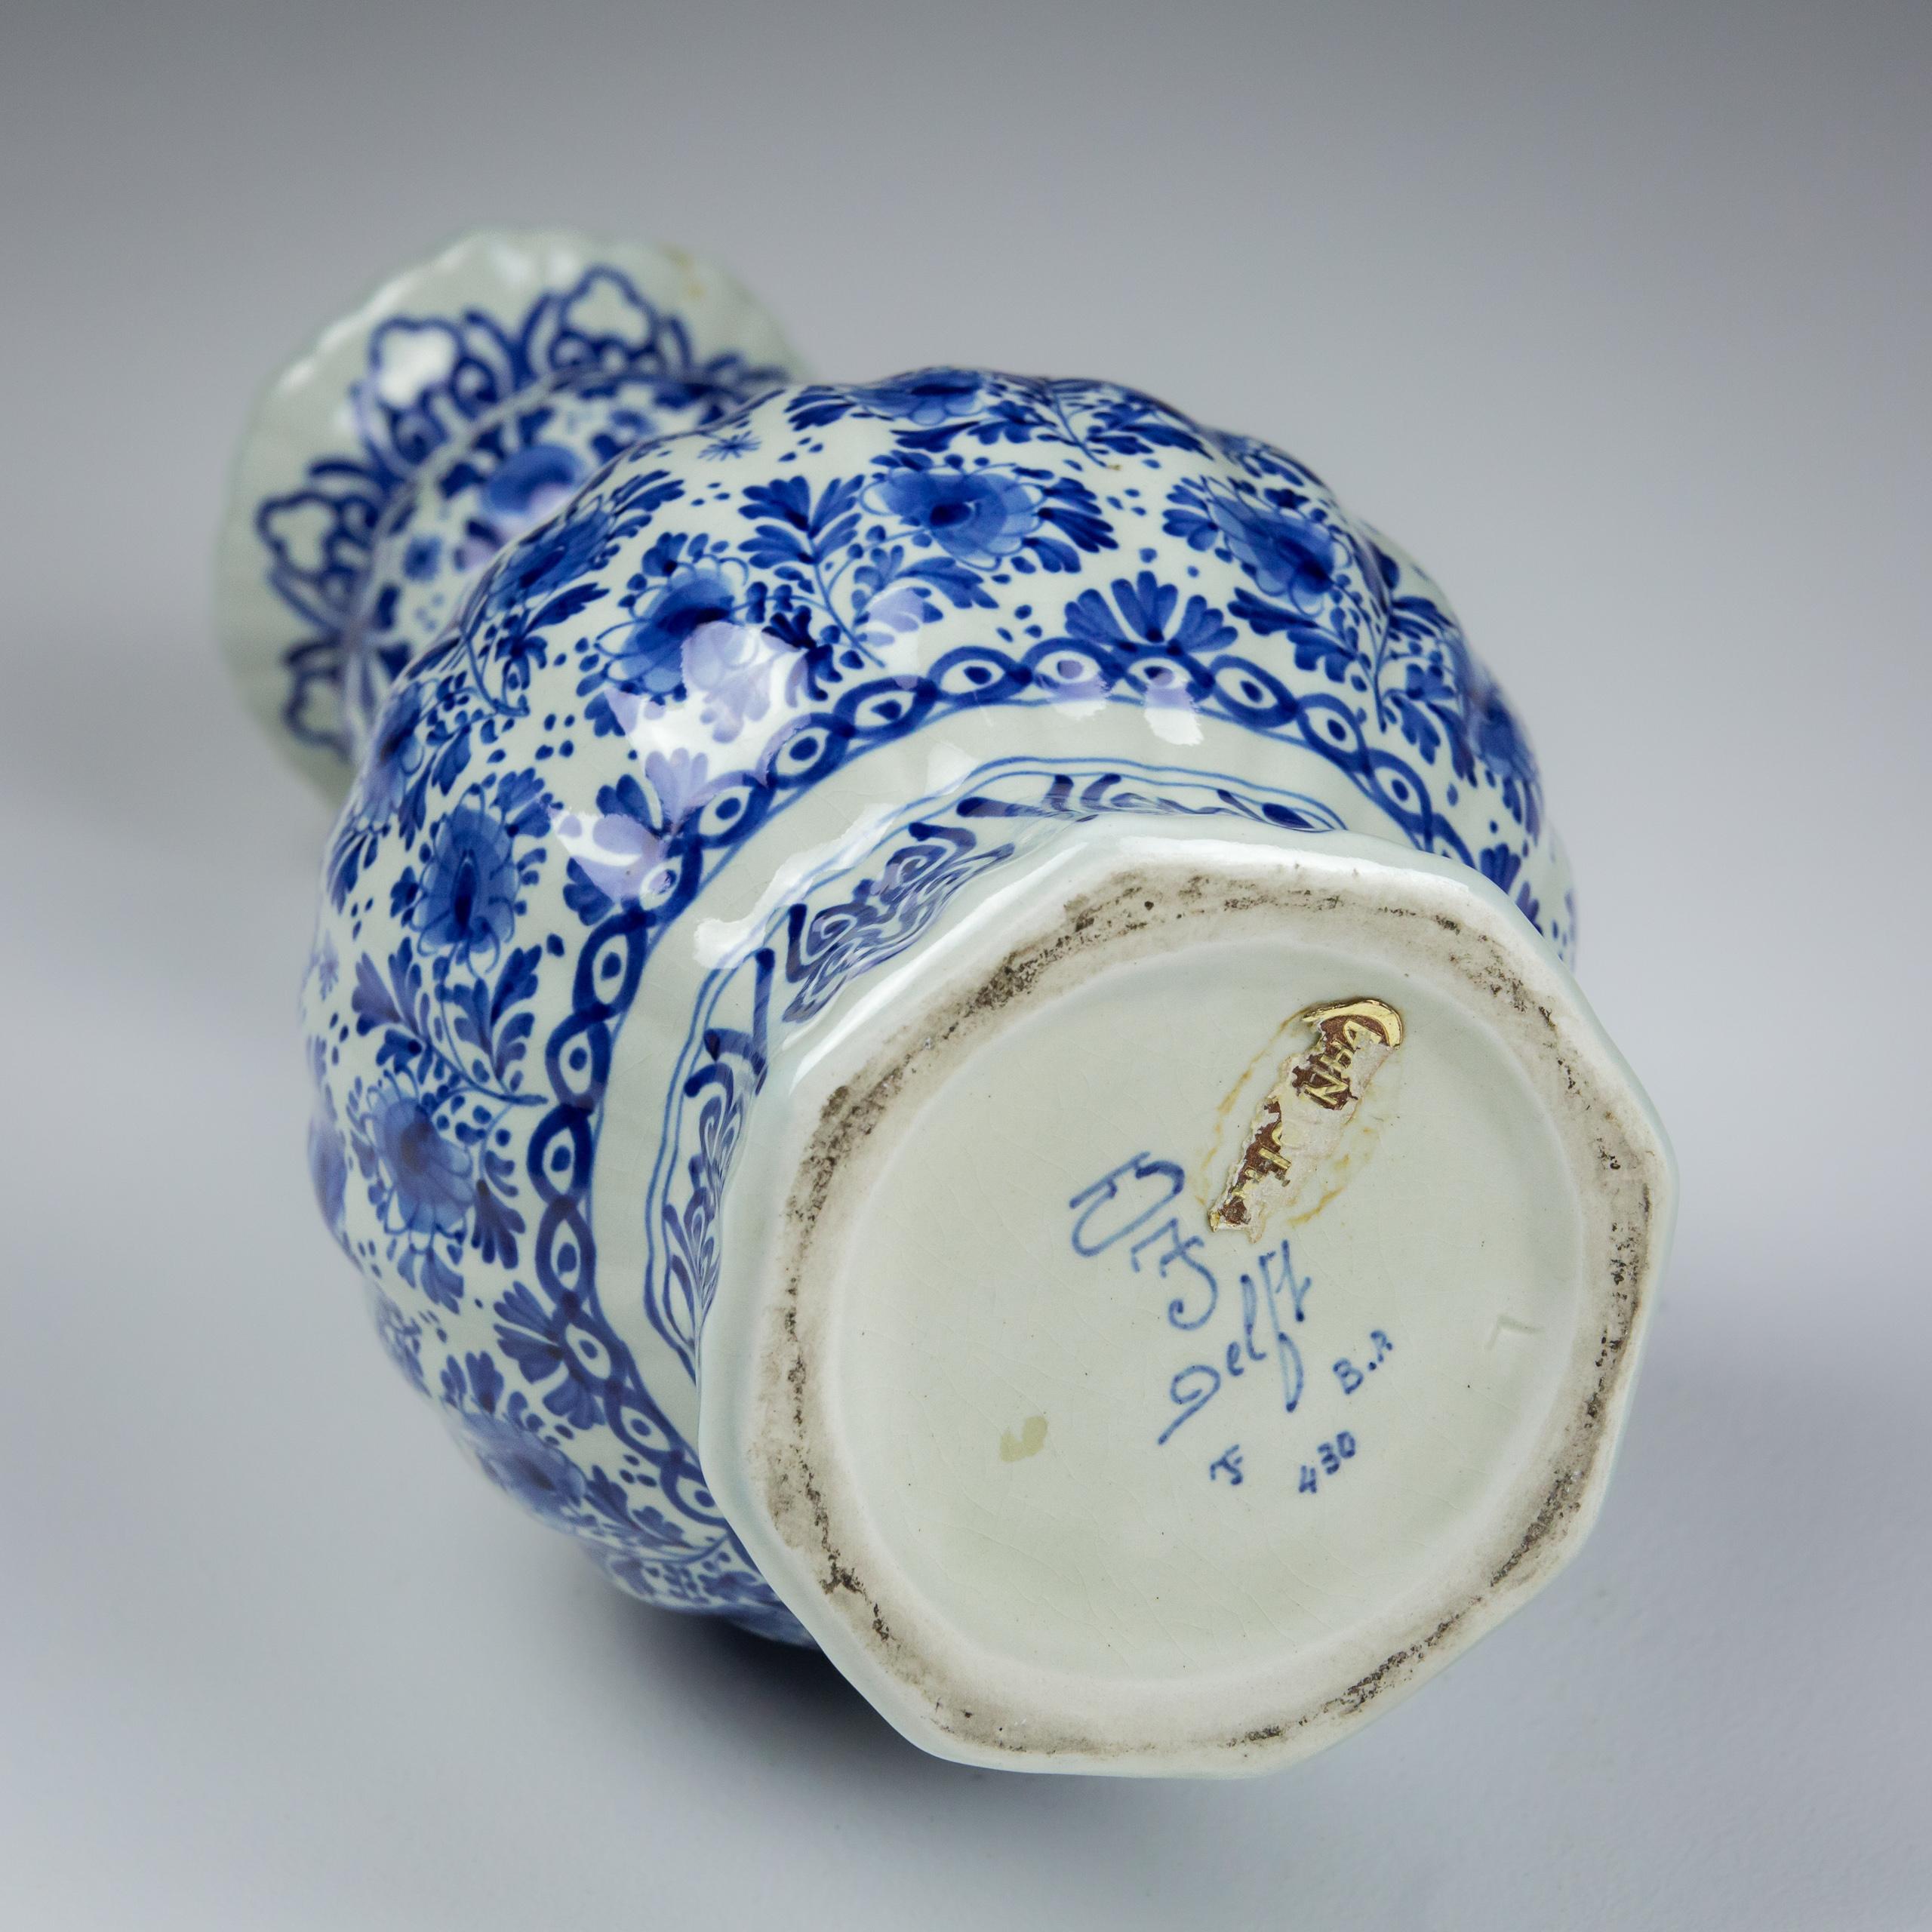 20th Century Blue and White Delft Knobbelvaas or Gourd Vase For Sale 3